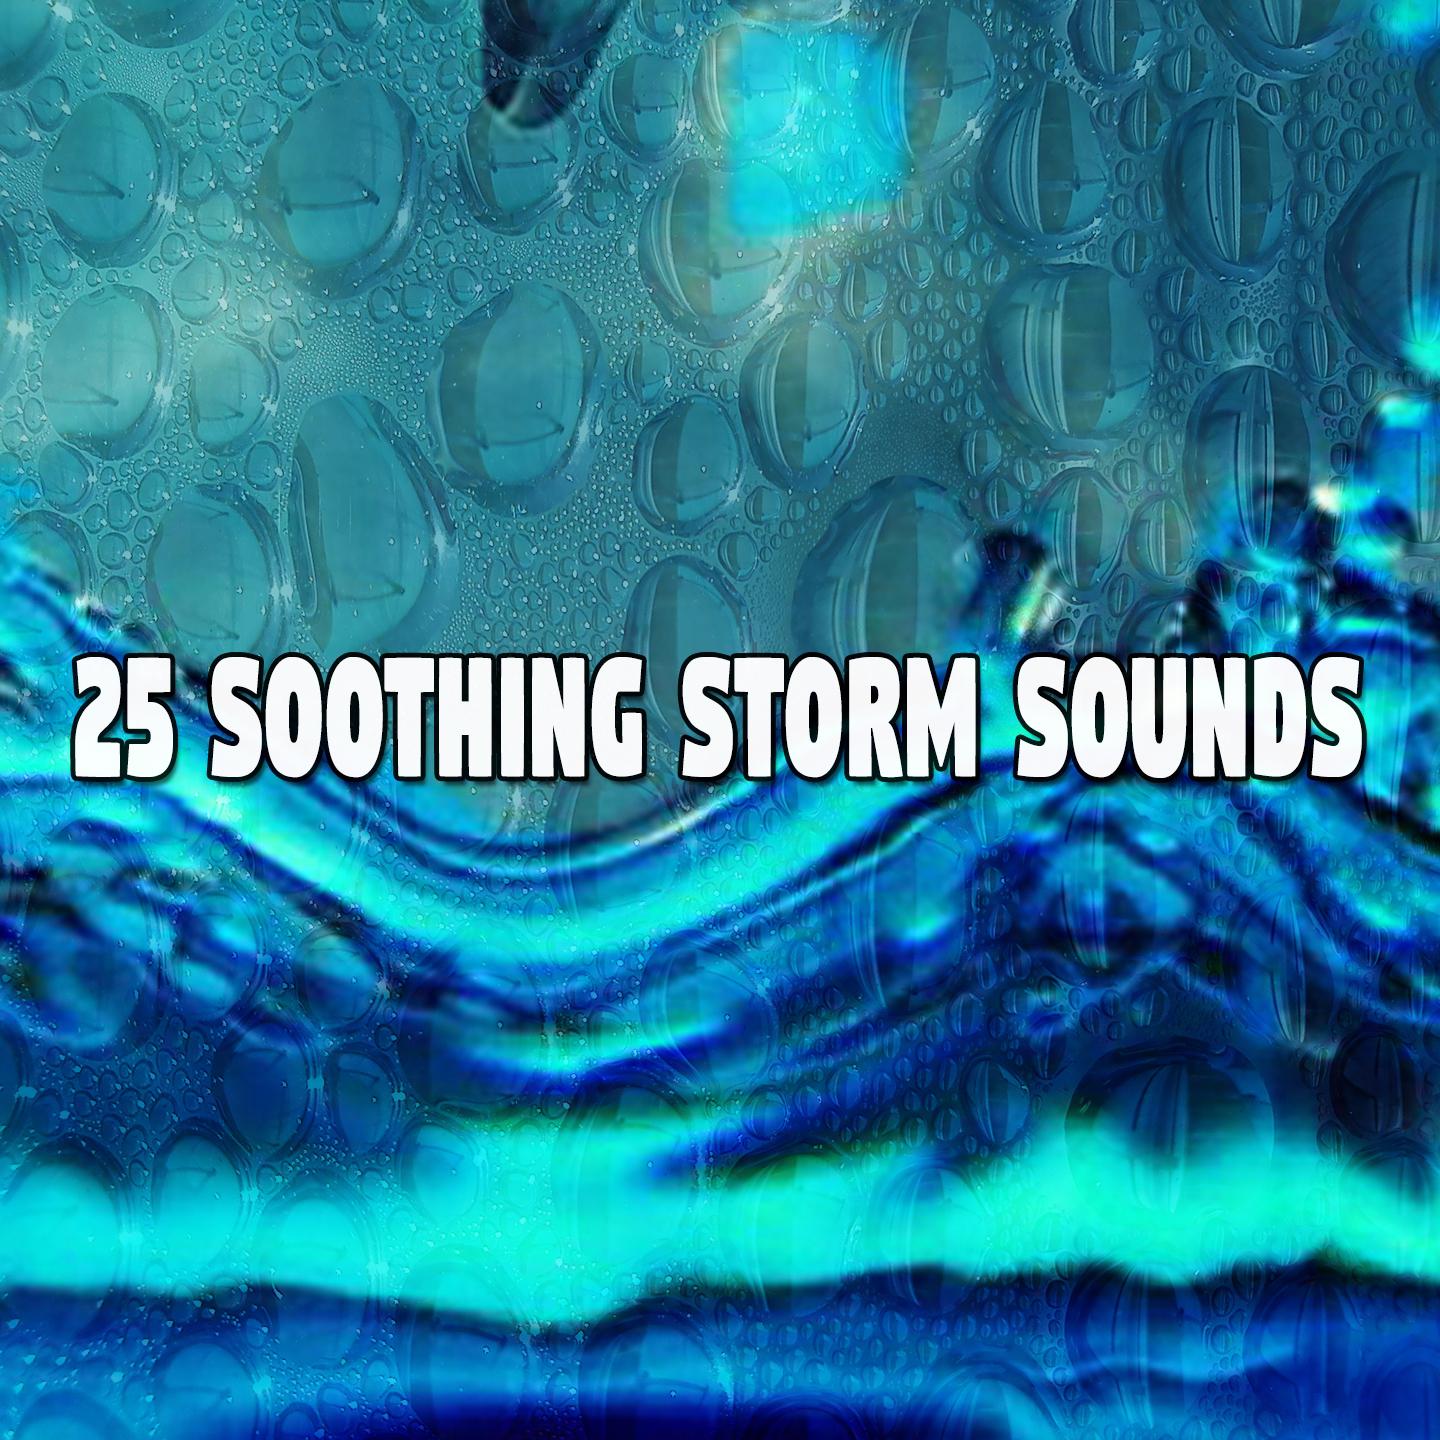 25 Soothing Storm Sounds